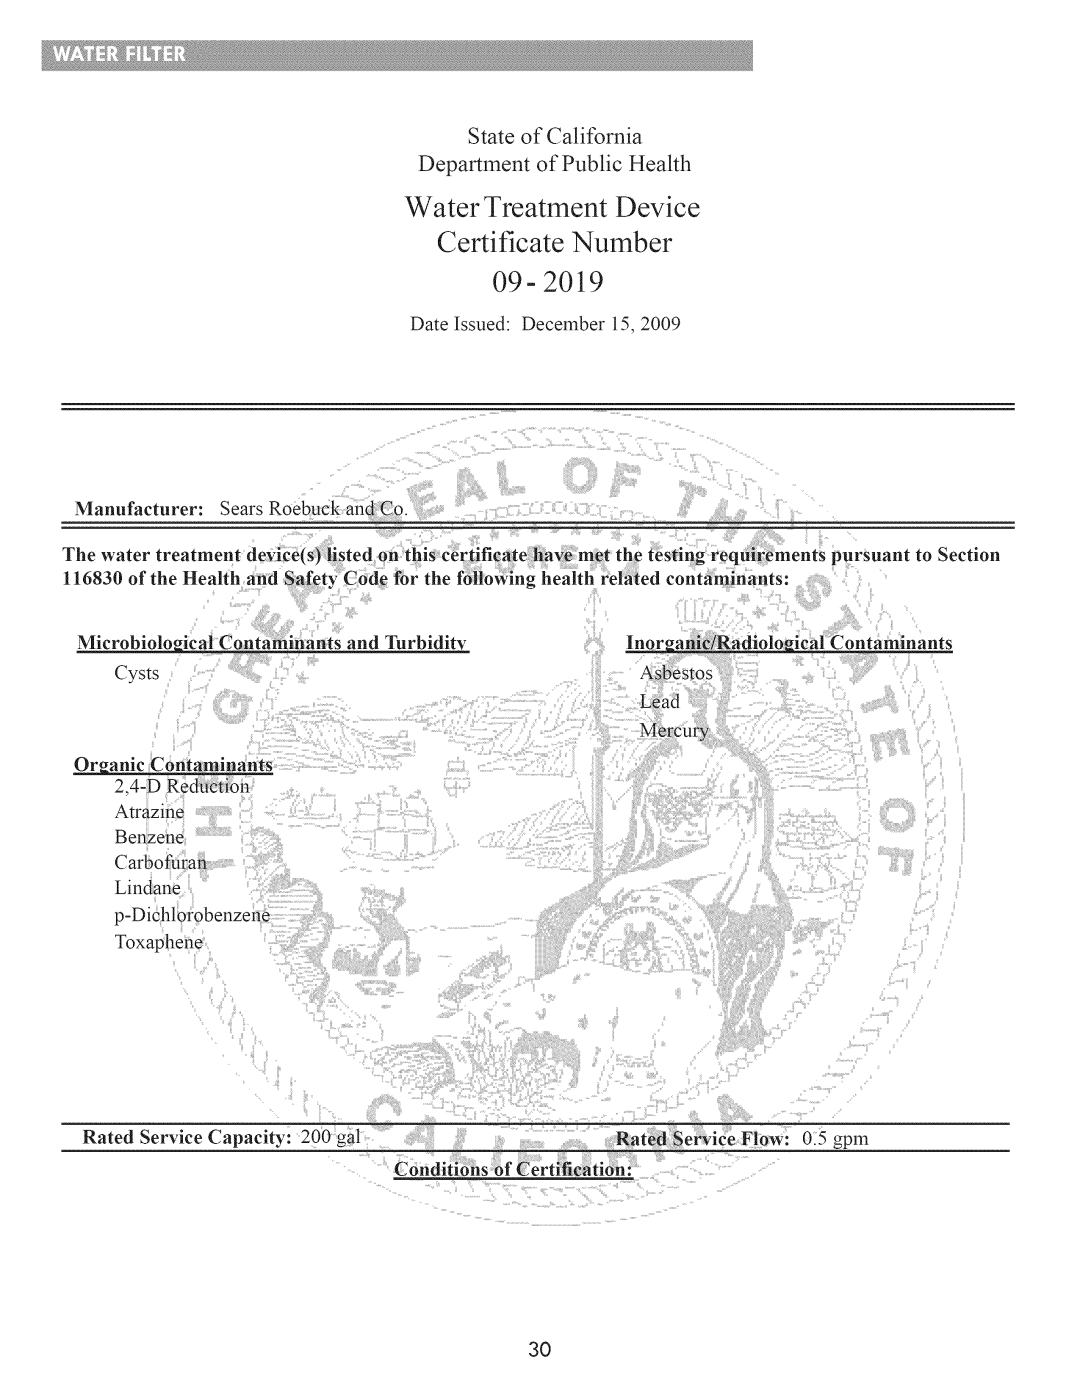 Kenmore 795.7202 Water Treatment Device Certificate Number, State of California Department of Public Health, Toxaphene 